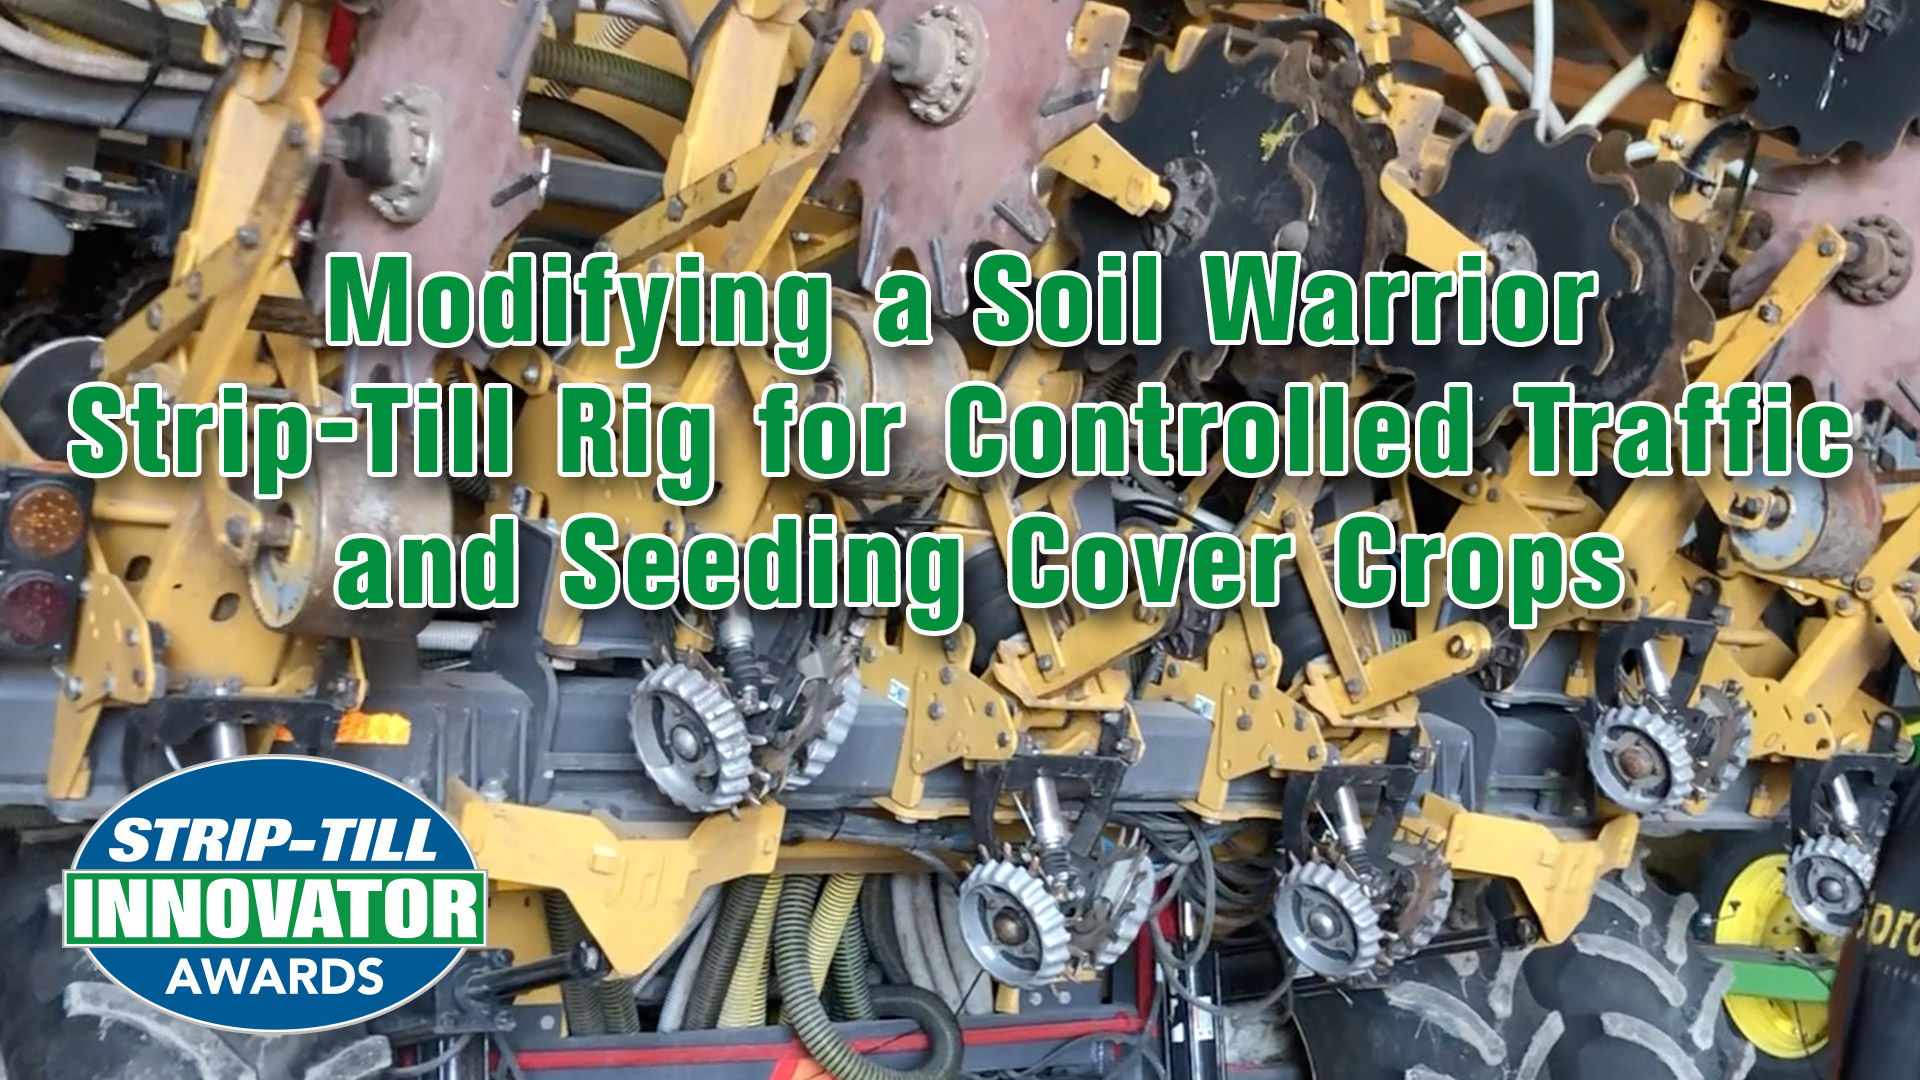 Modifying-a-Soil-Warrior-Strip-Till-Rig-for-Controlled-Traffic-and-Seeding-Cover-Crops.jpg